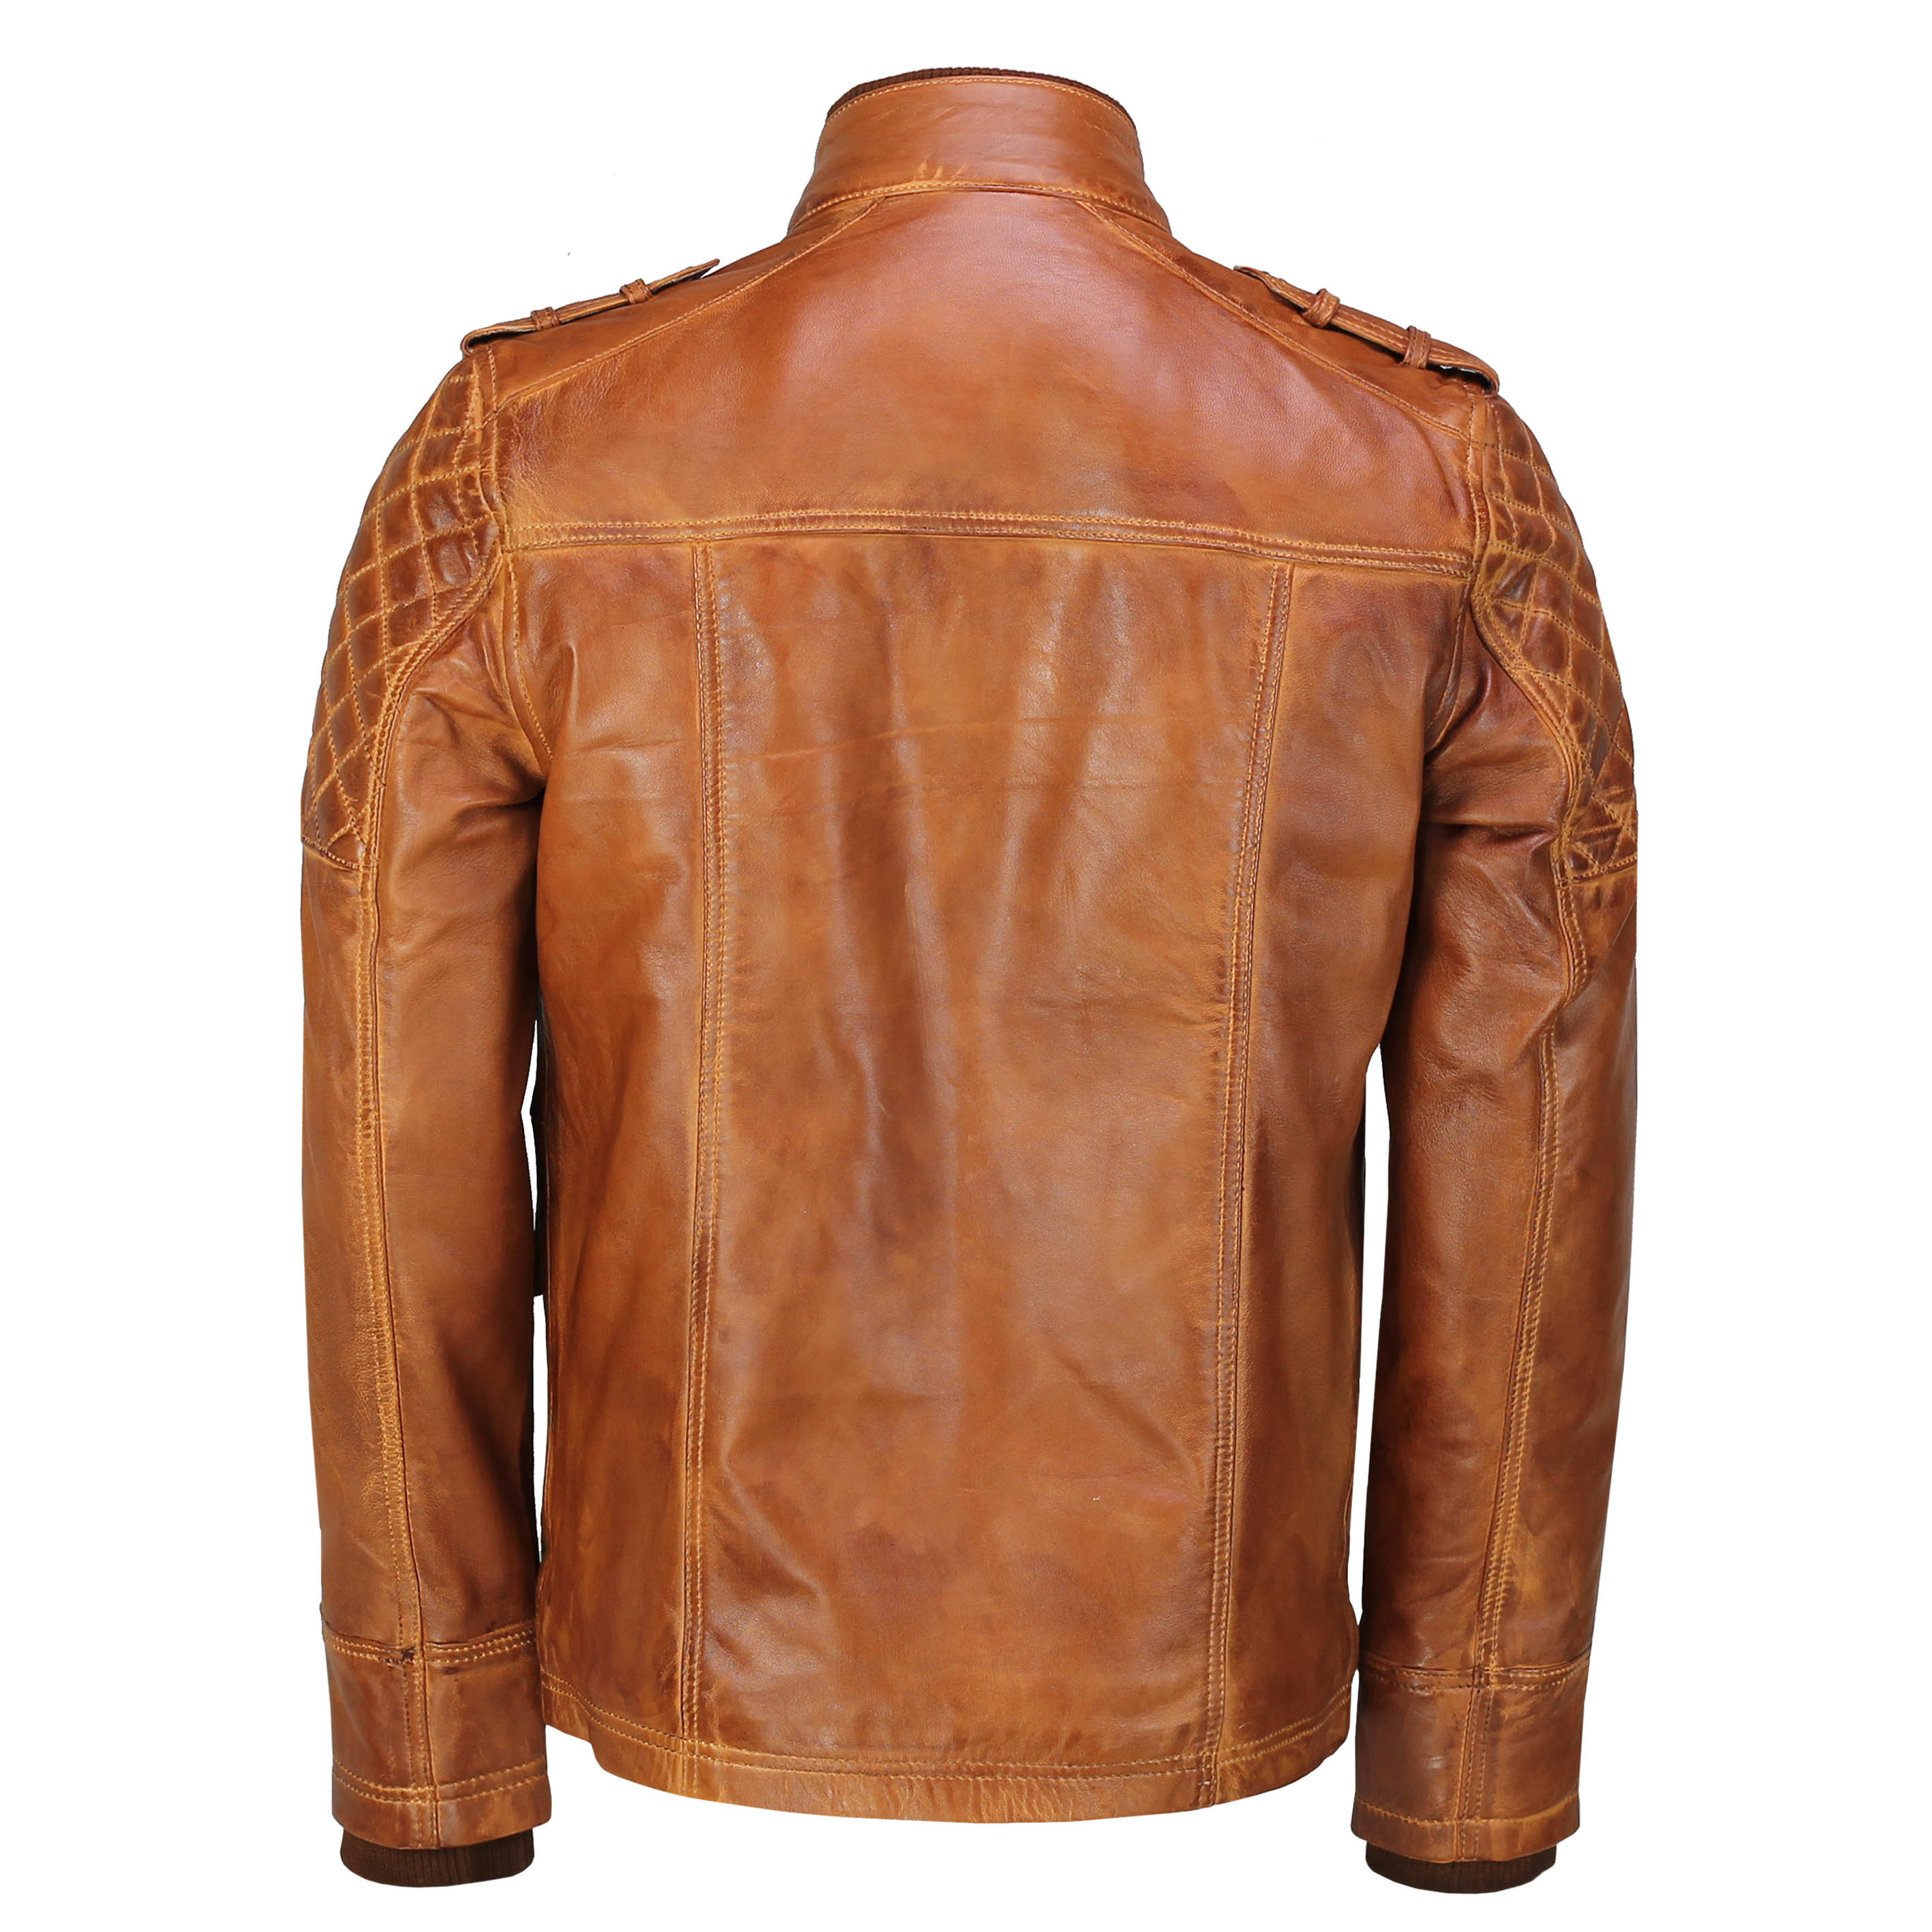 Mens Real Leather Vintage Style Retro Military Field Funnel Neck Slim Fit Jacket eBay